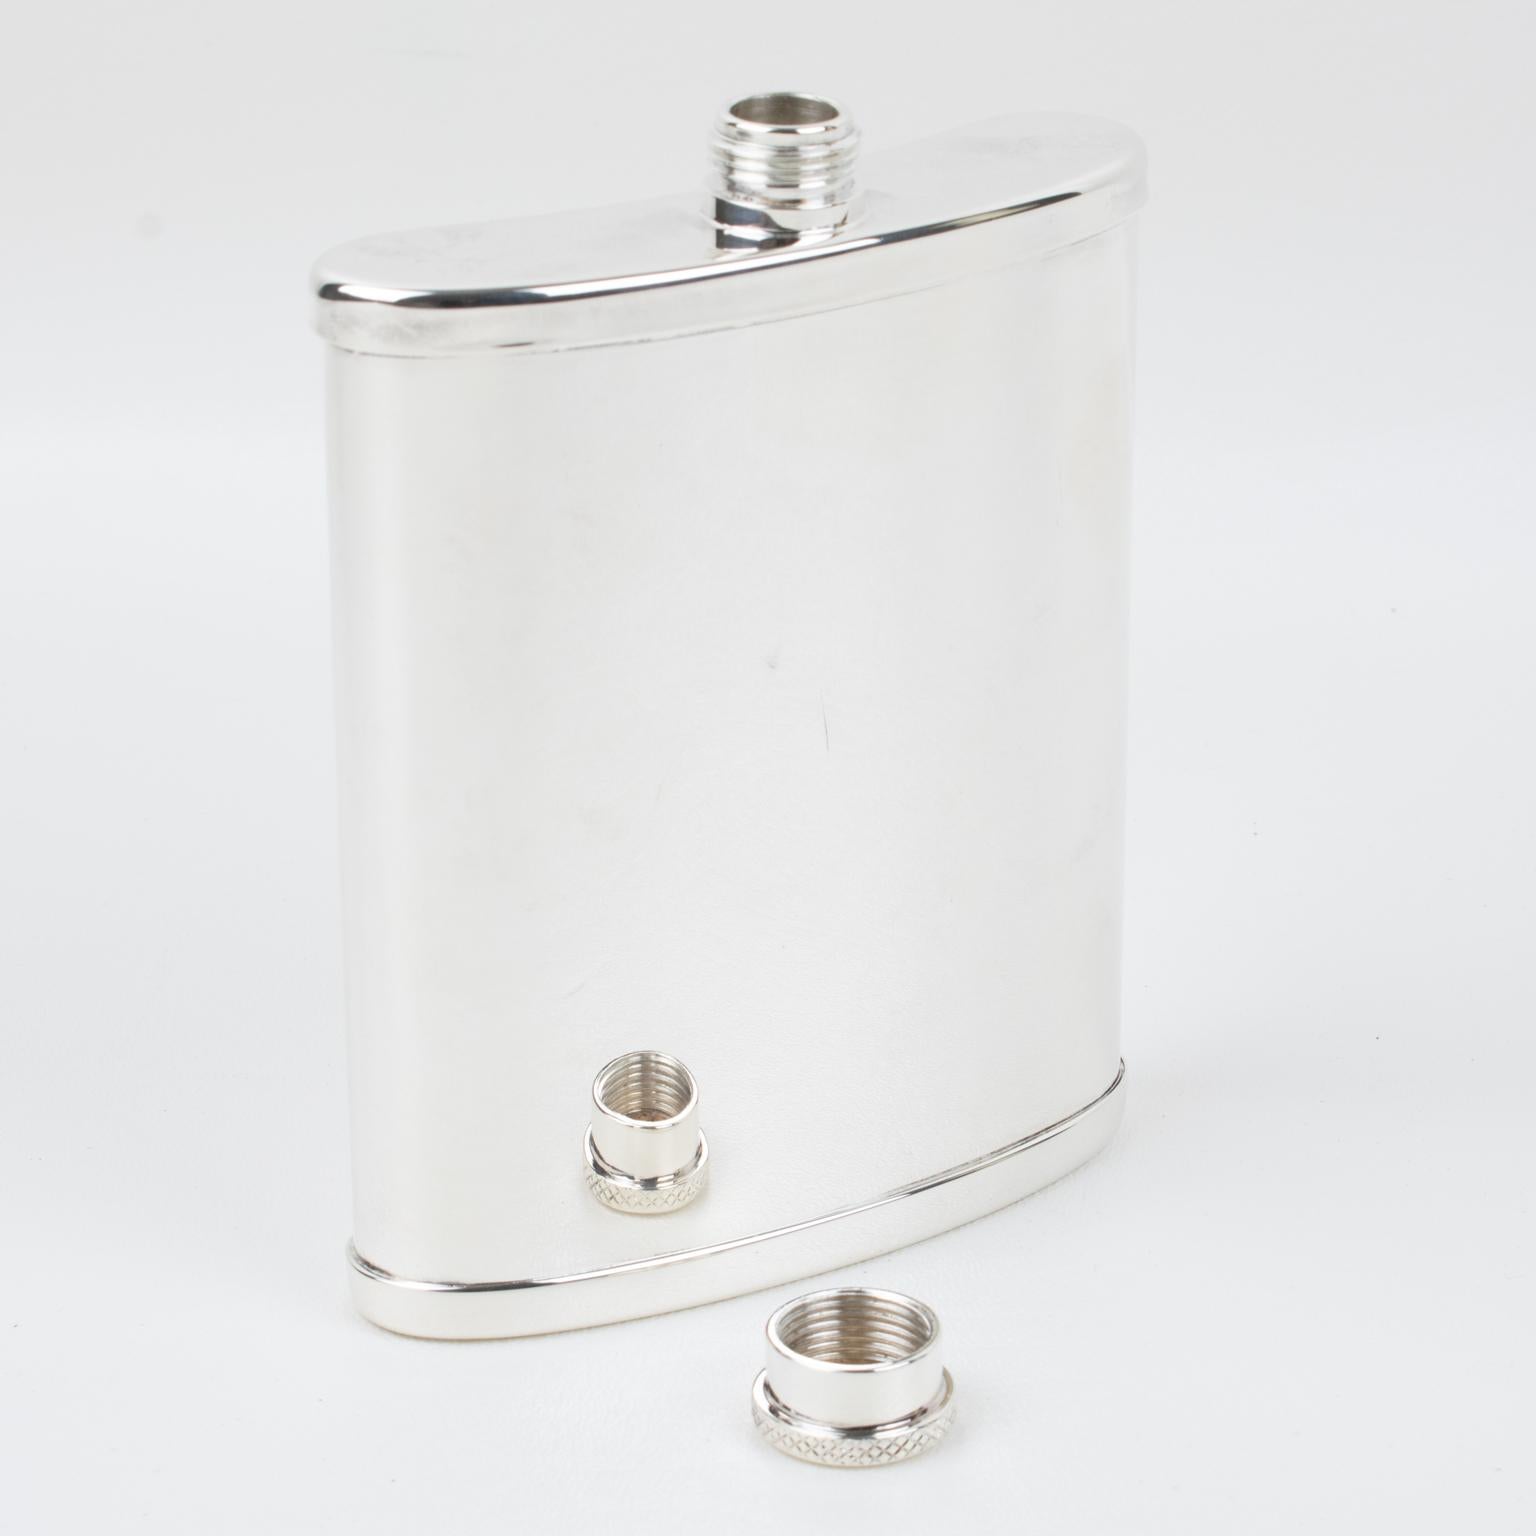 Late 20th Century Silver Plate Flask by St James Brazil for D.B. Howes & Son